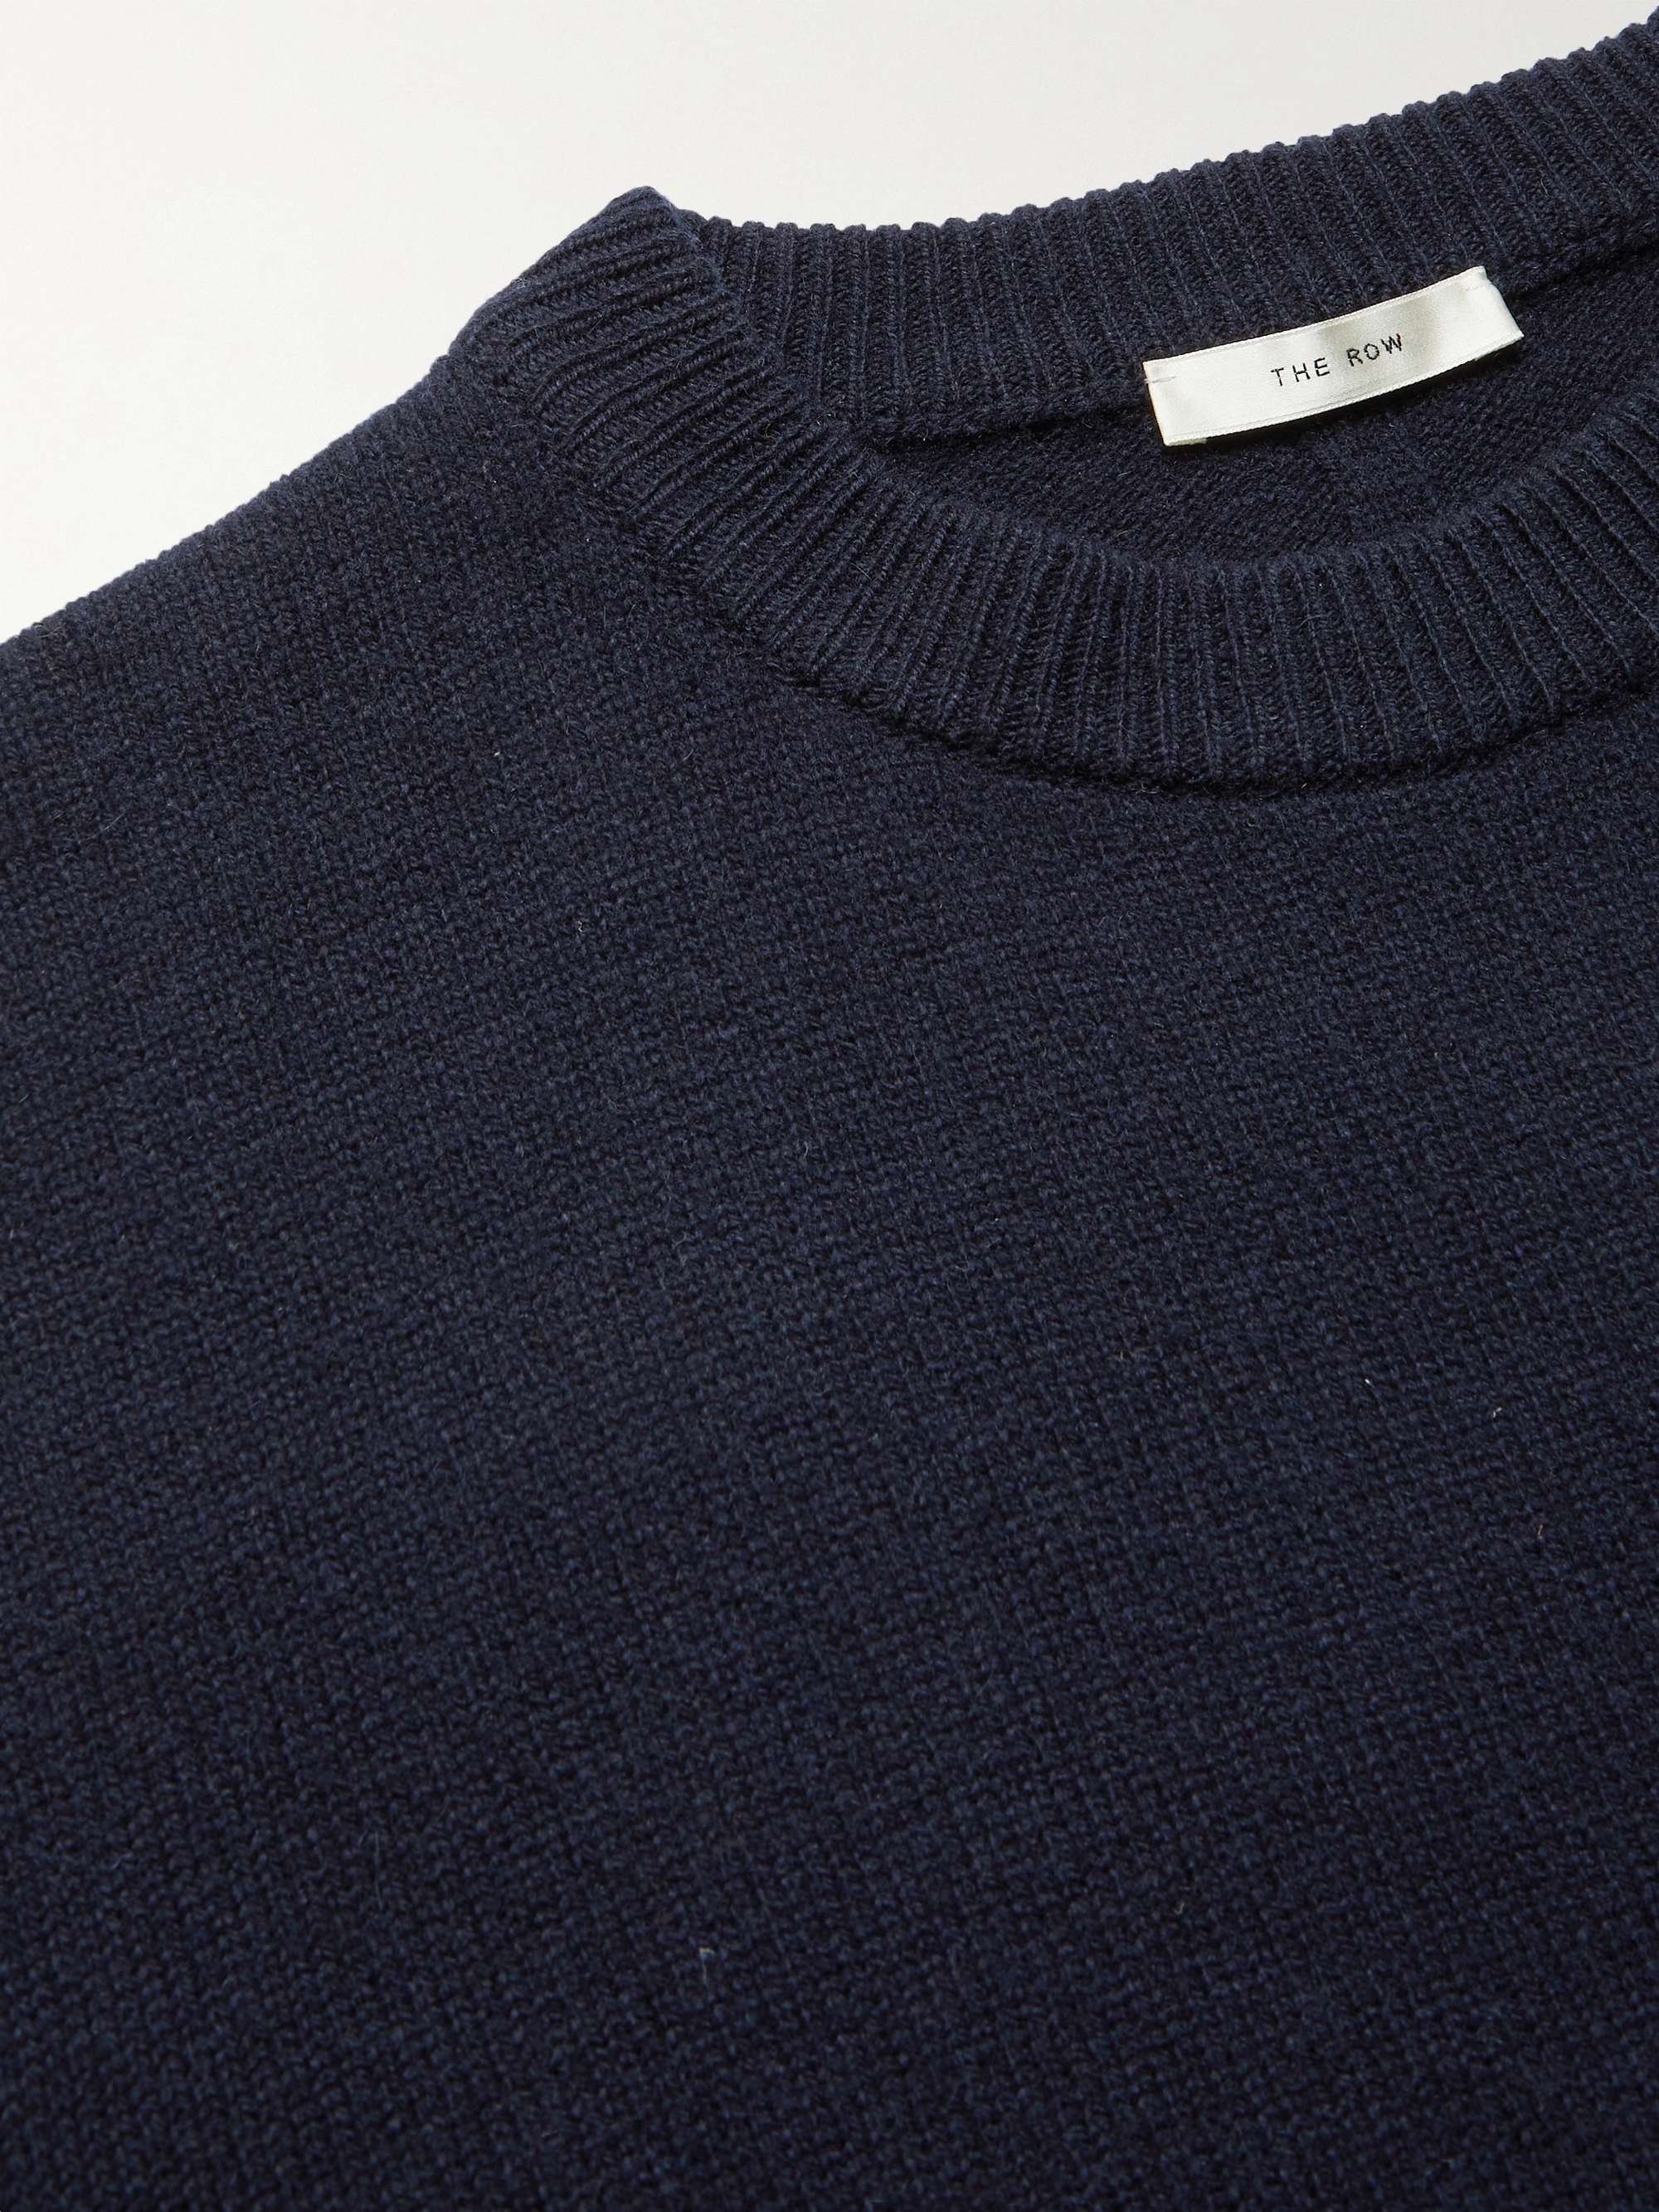 THE ROW Sibem Wool and Cashmere-Blend Sweater